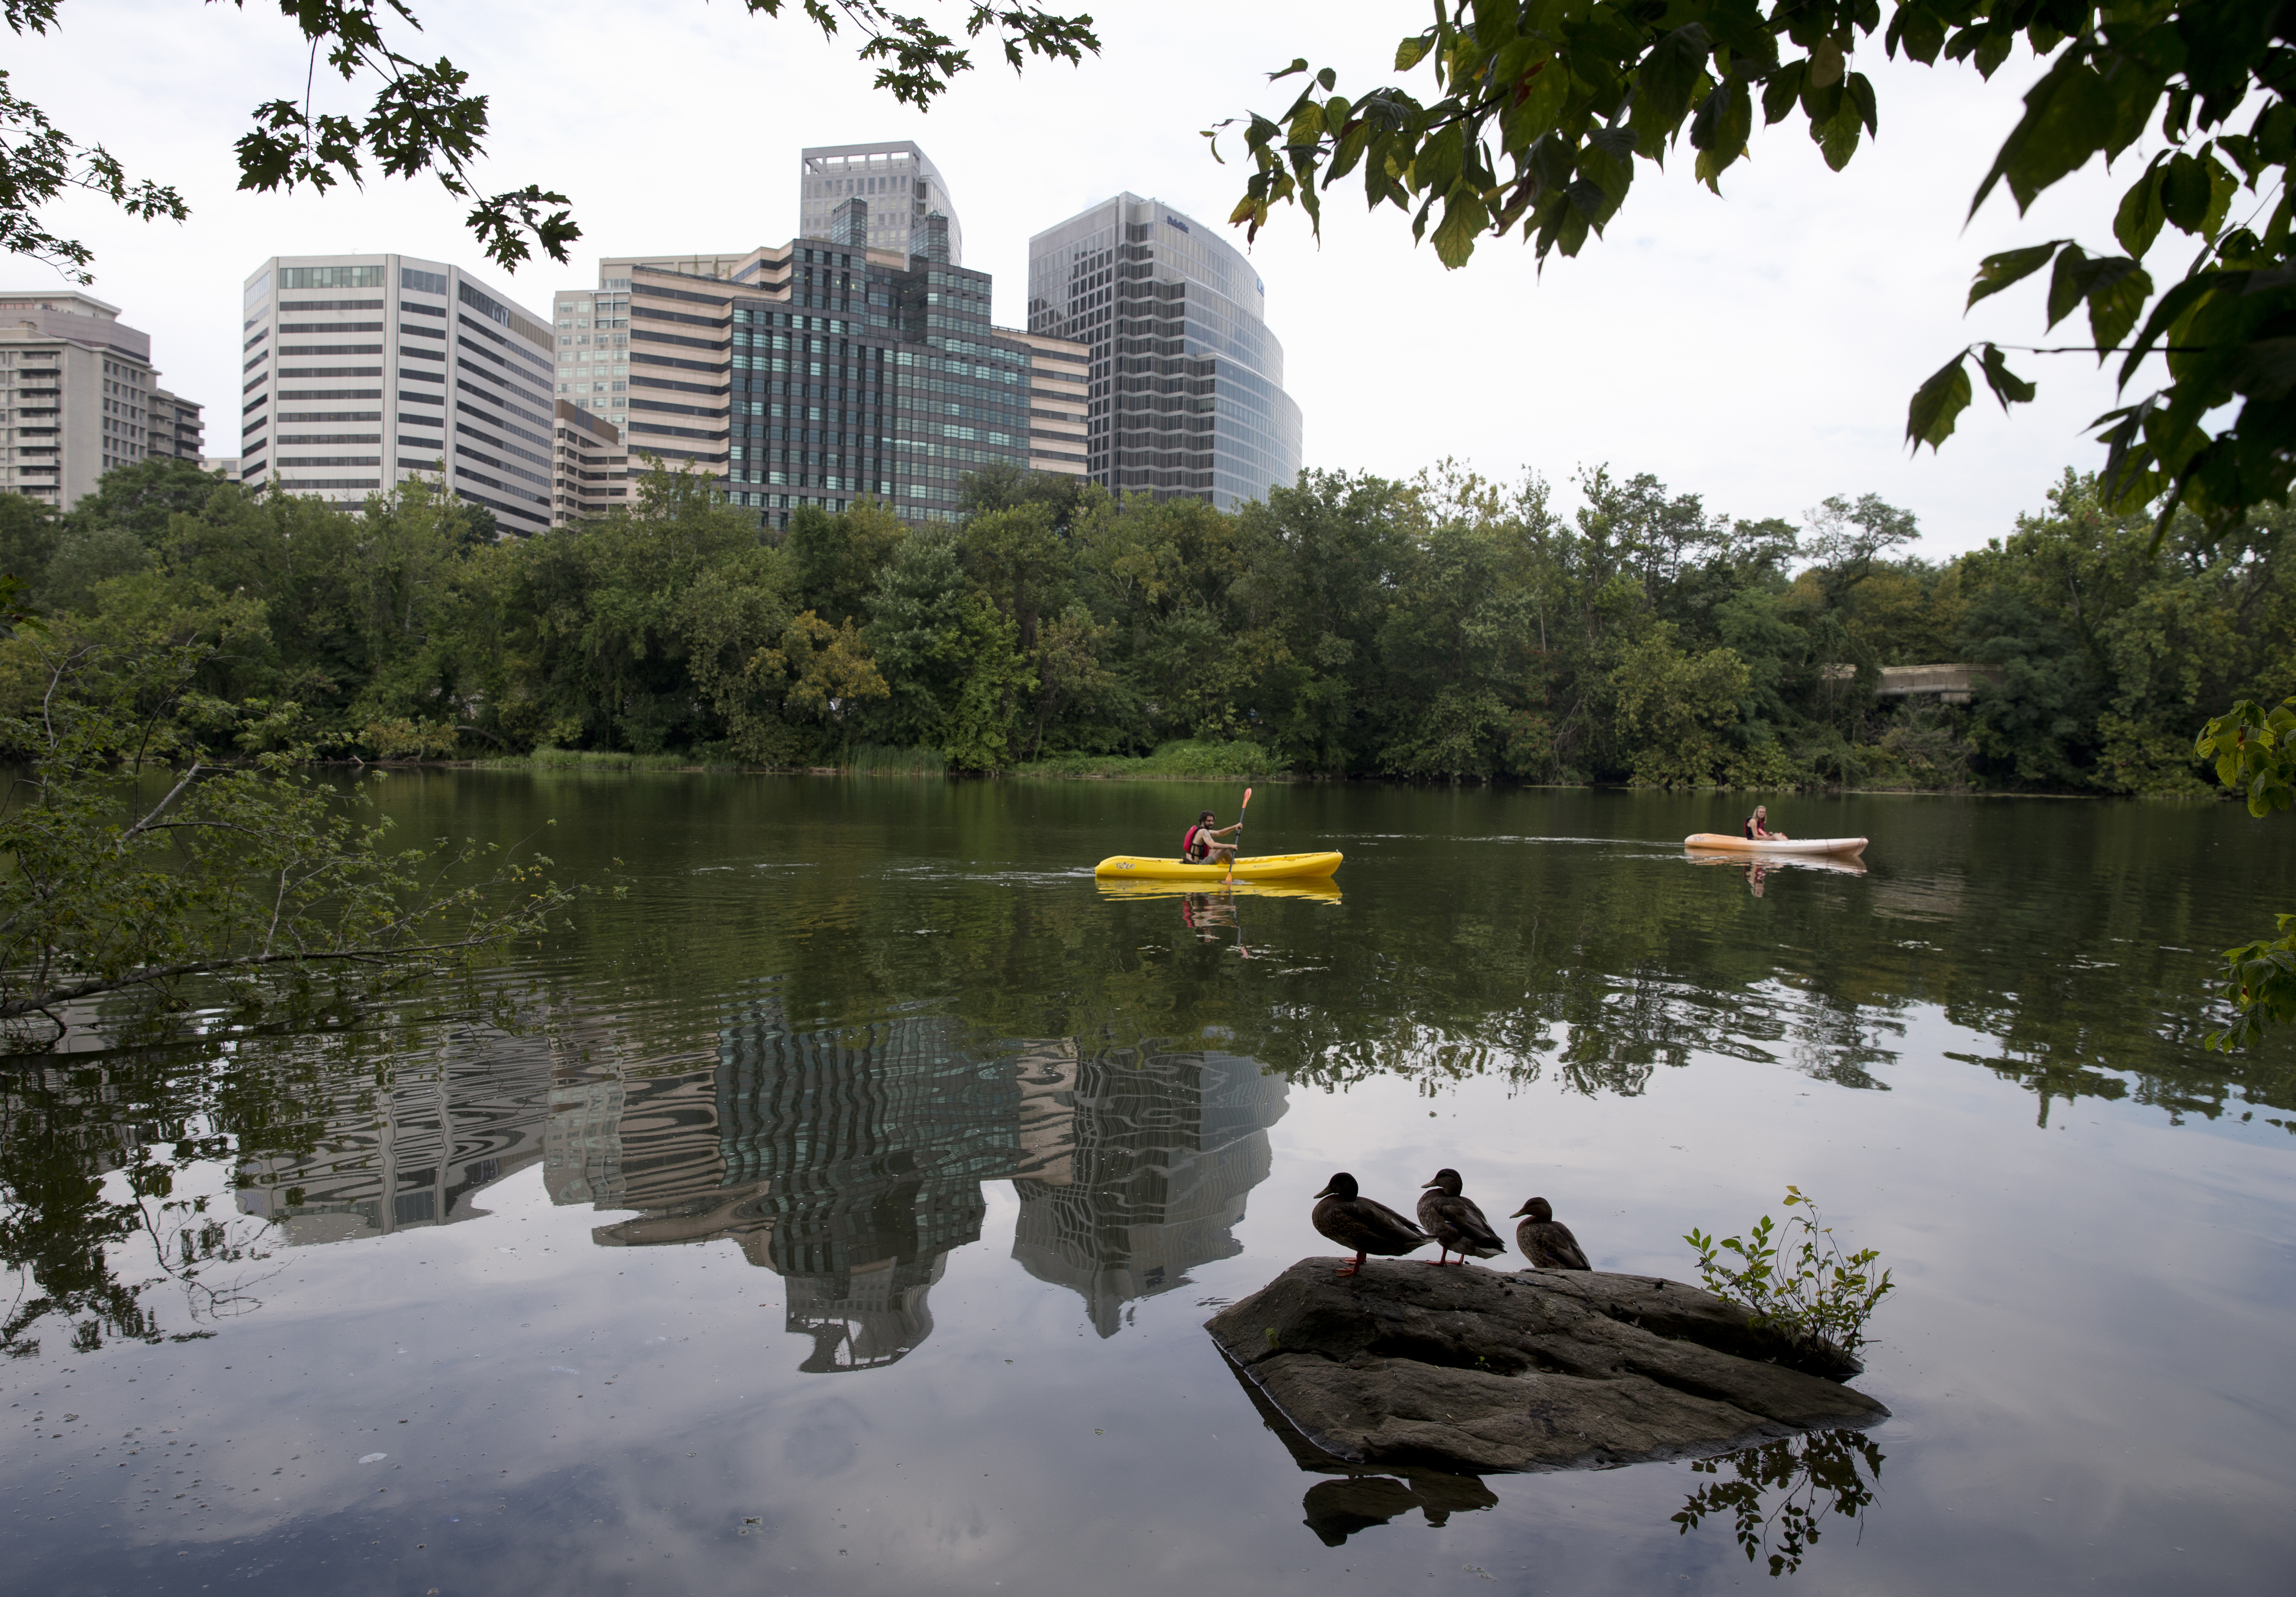 Grant Thornton moving 1,000 local jobs to Rosslyn